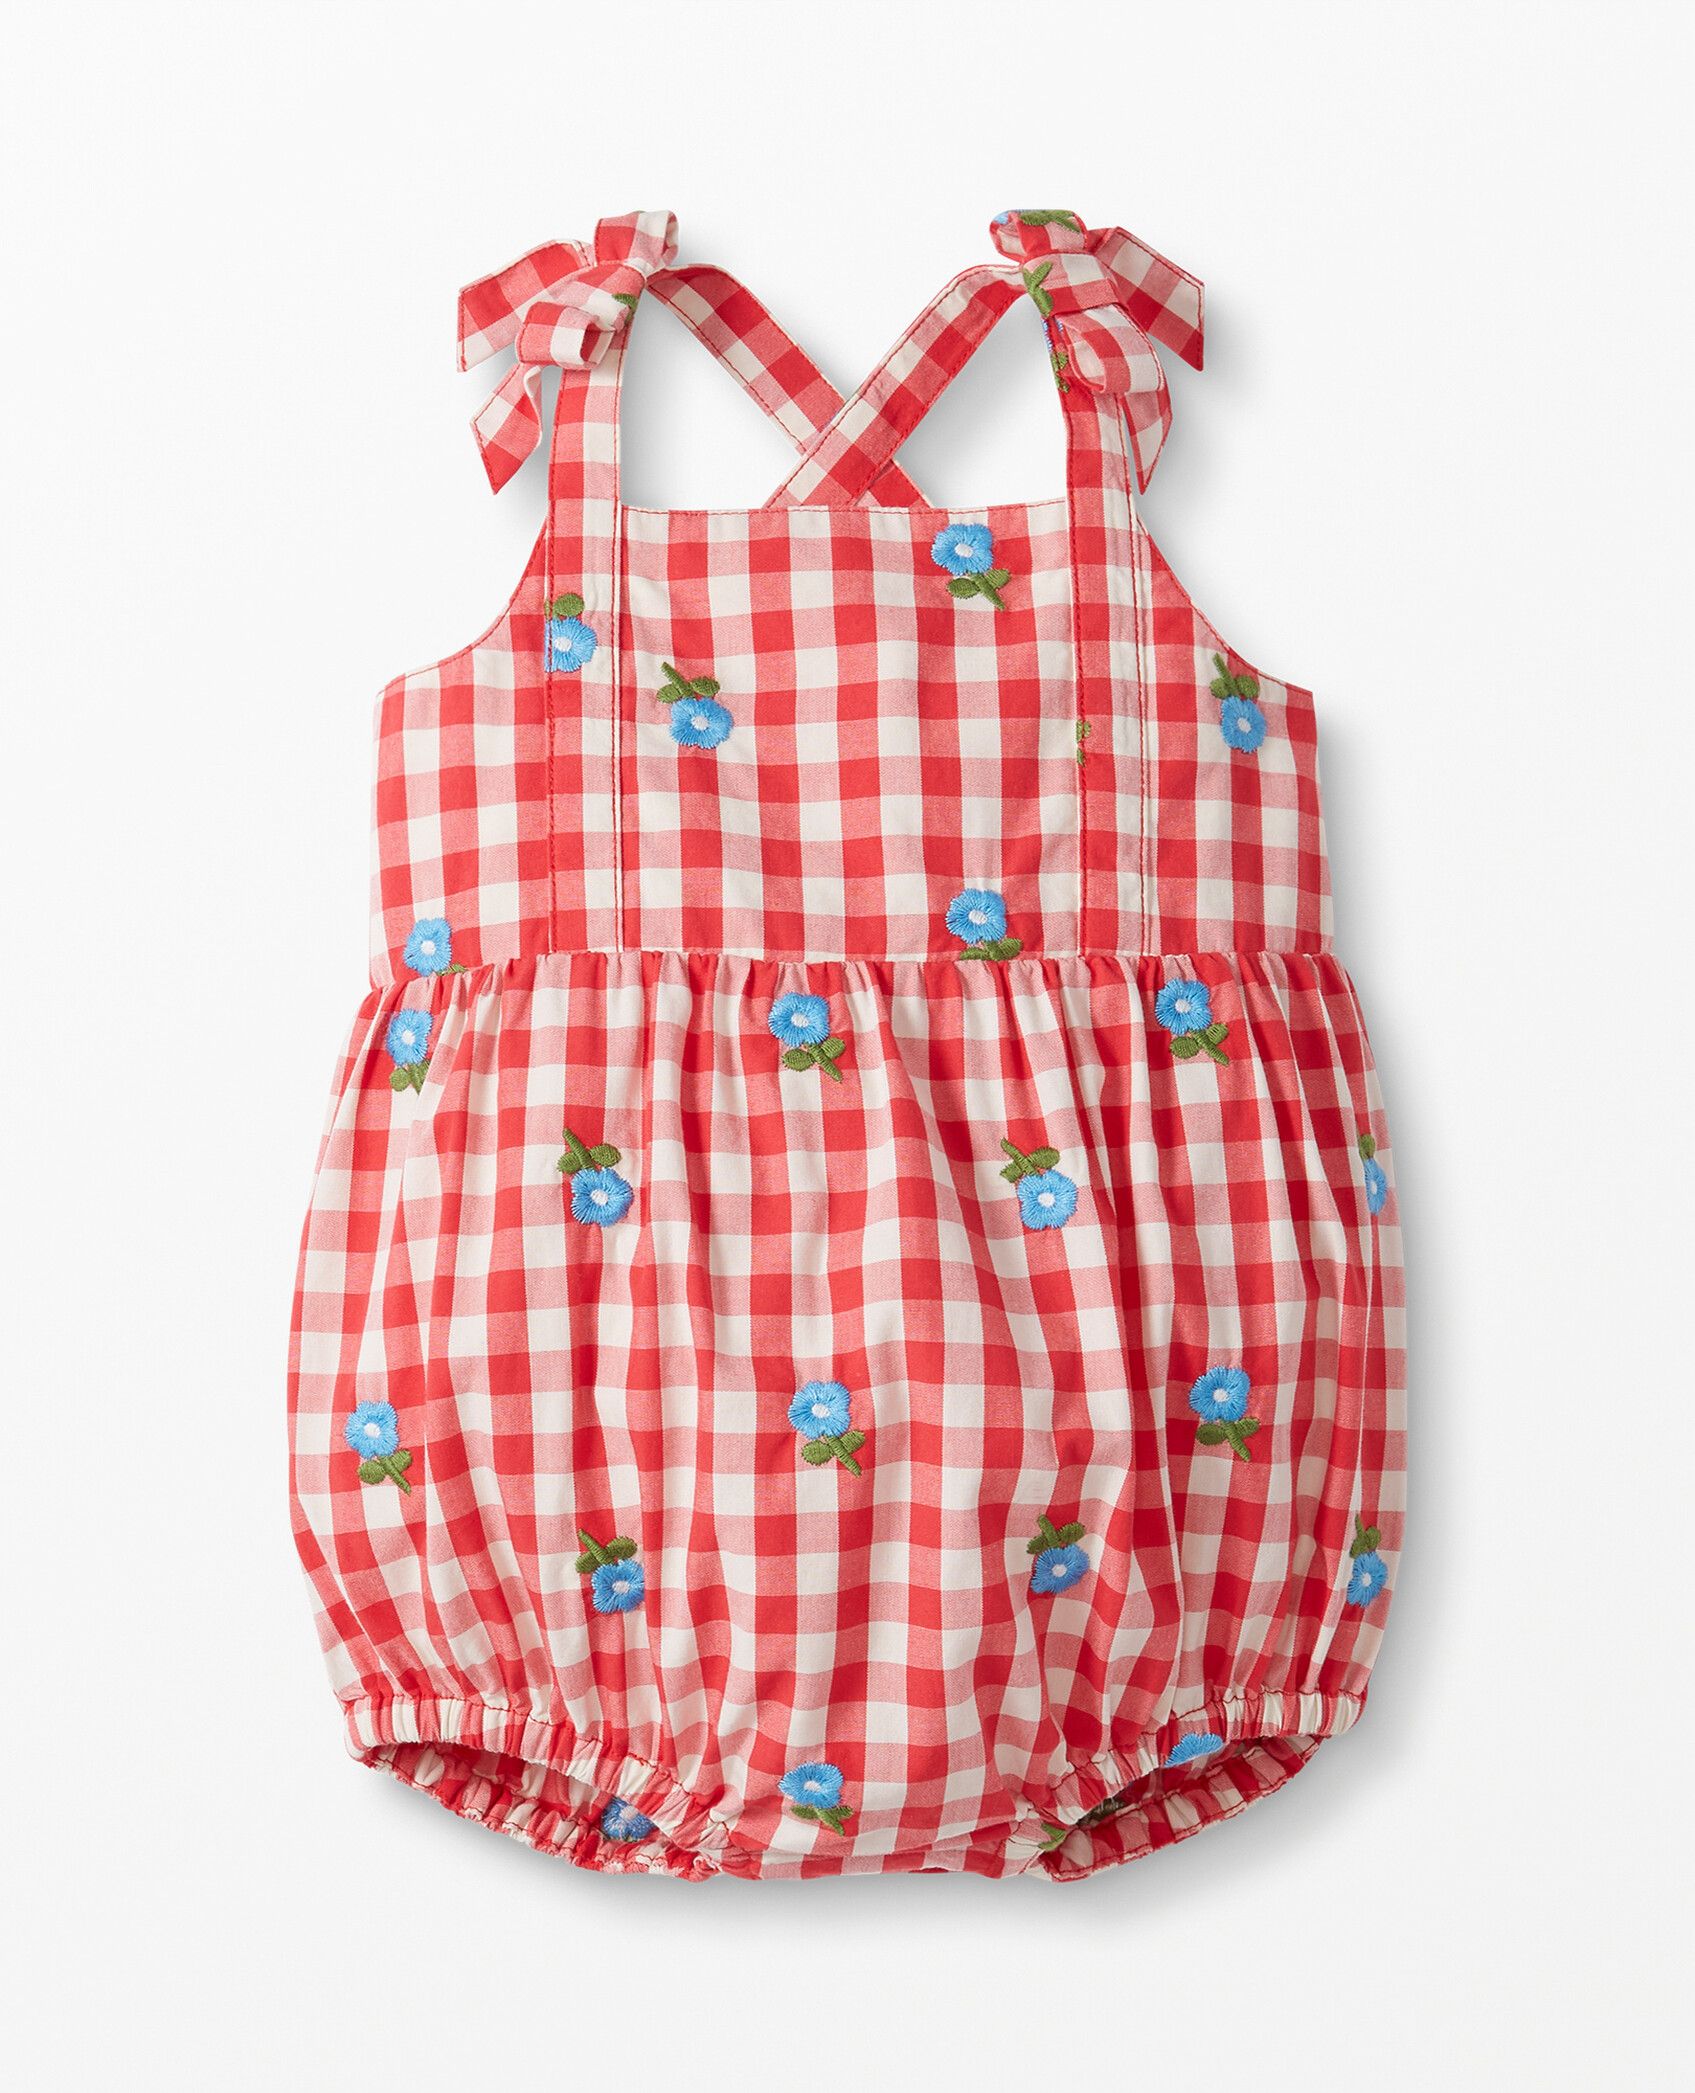 Baby Gingham Romper In Cotton Poplin | Hanna Andersson